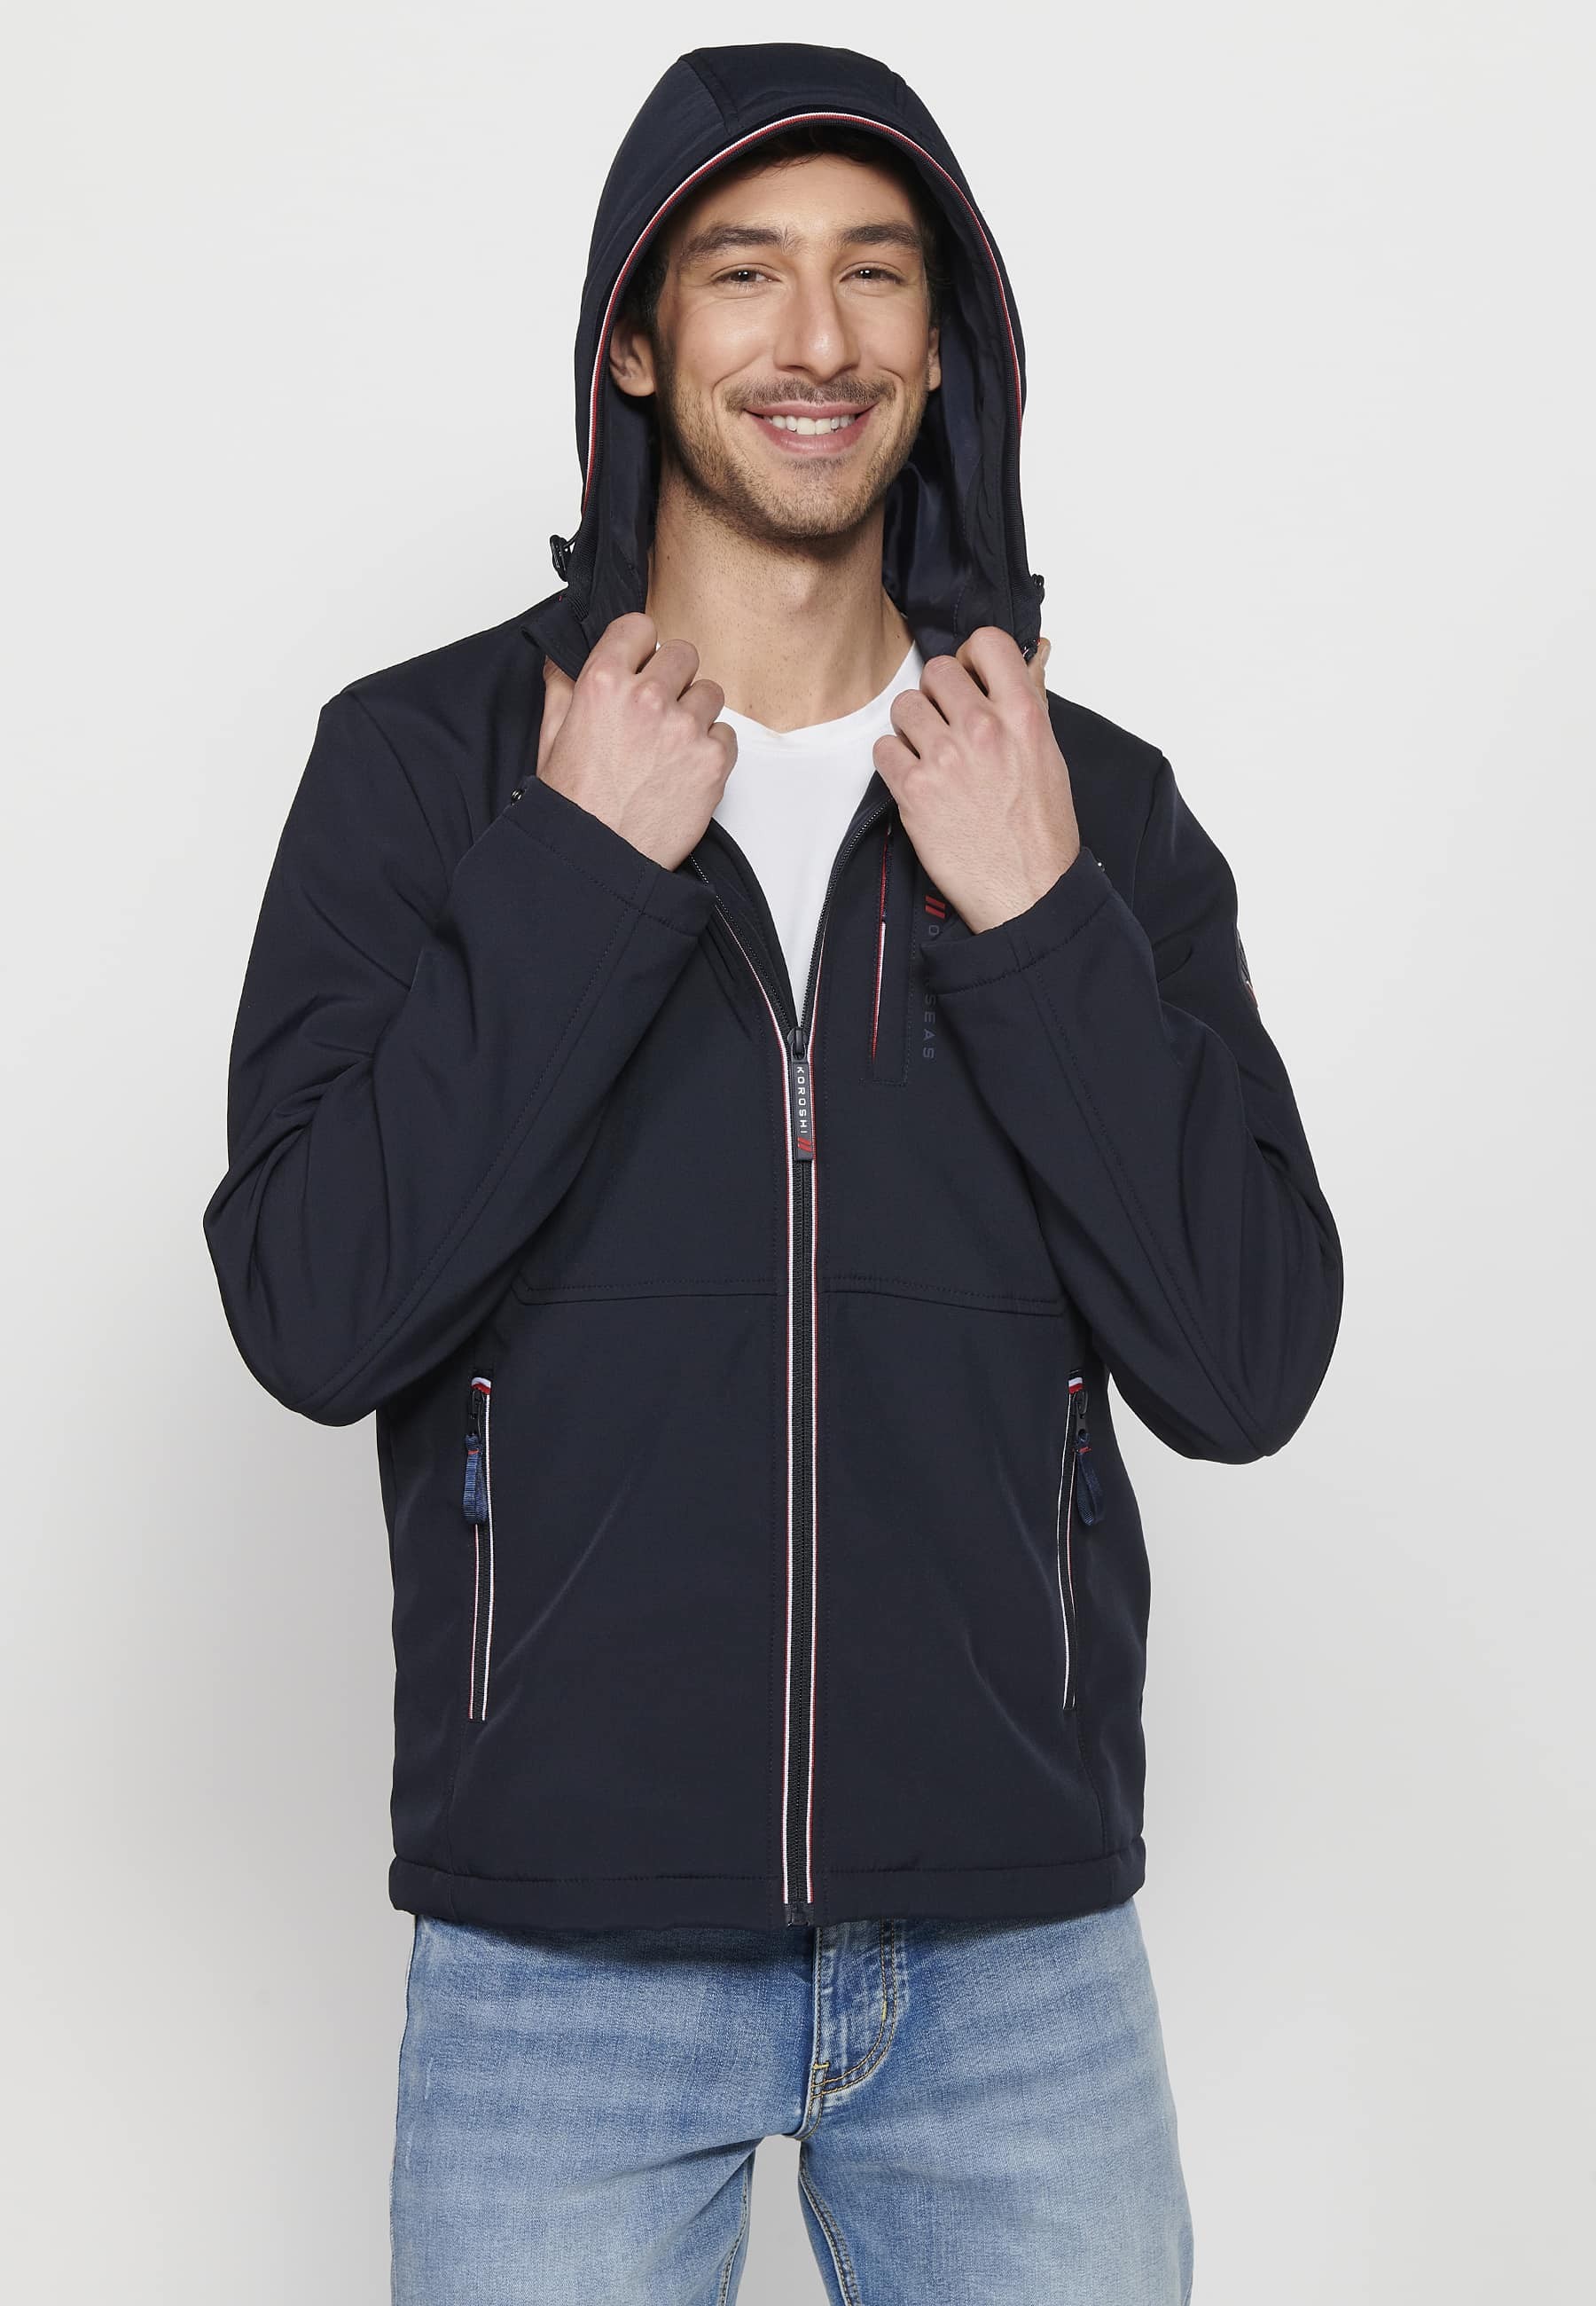 Navy Long Sleeve Jacket with Hooded Collar and Front Zipper Closure for Men 6